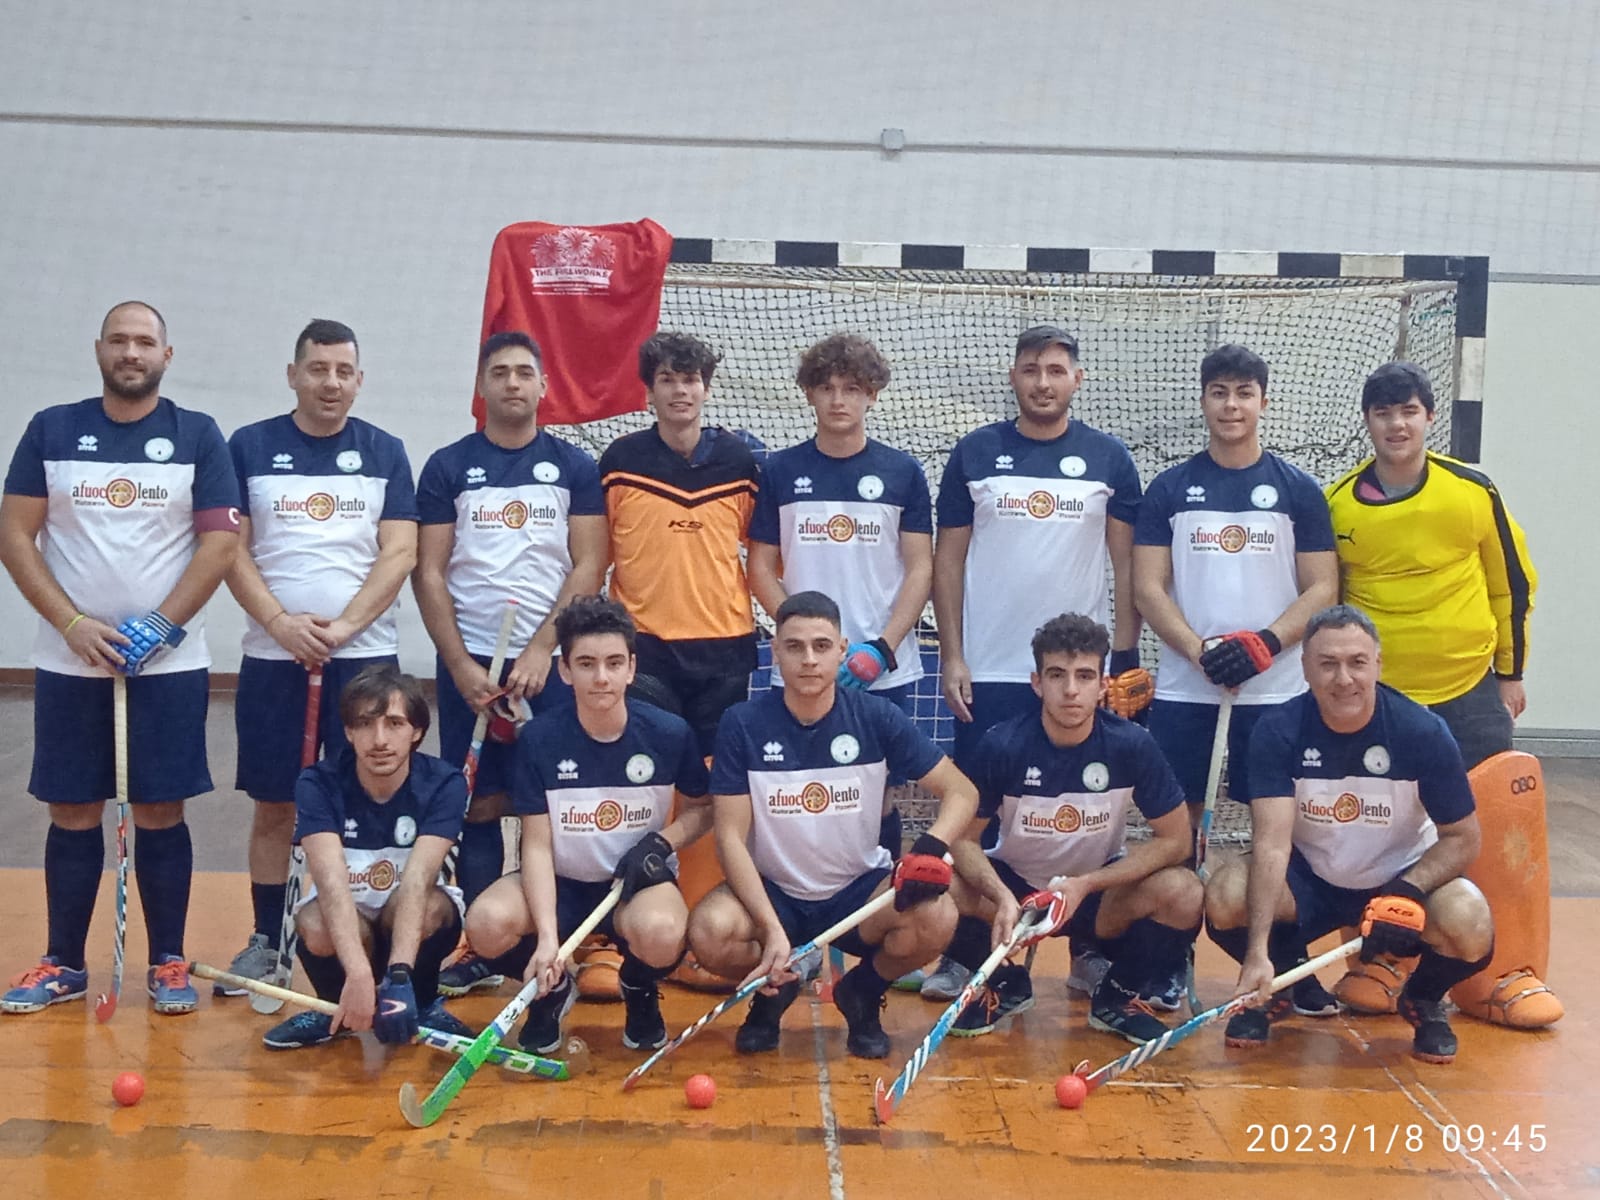 Barcellona Pozzo di Gotto: Sunday is the third day of indoor hockey – AMnotizie.it